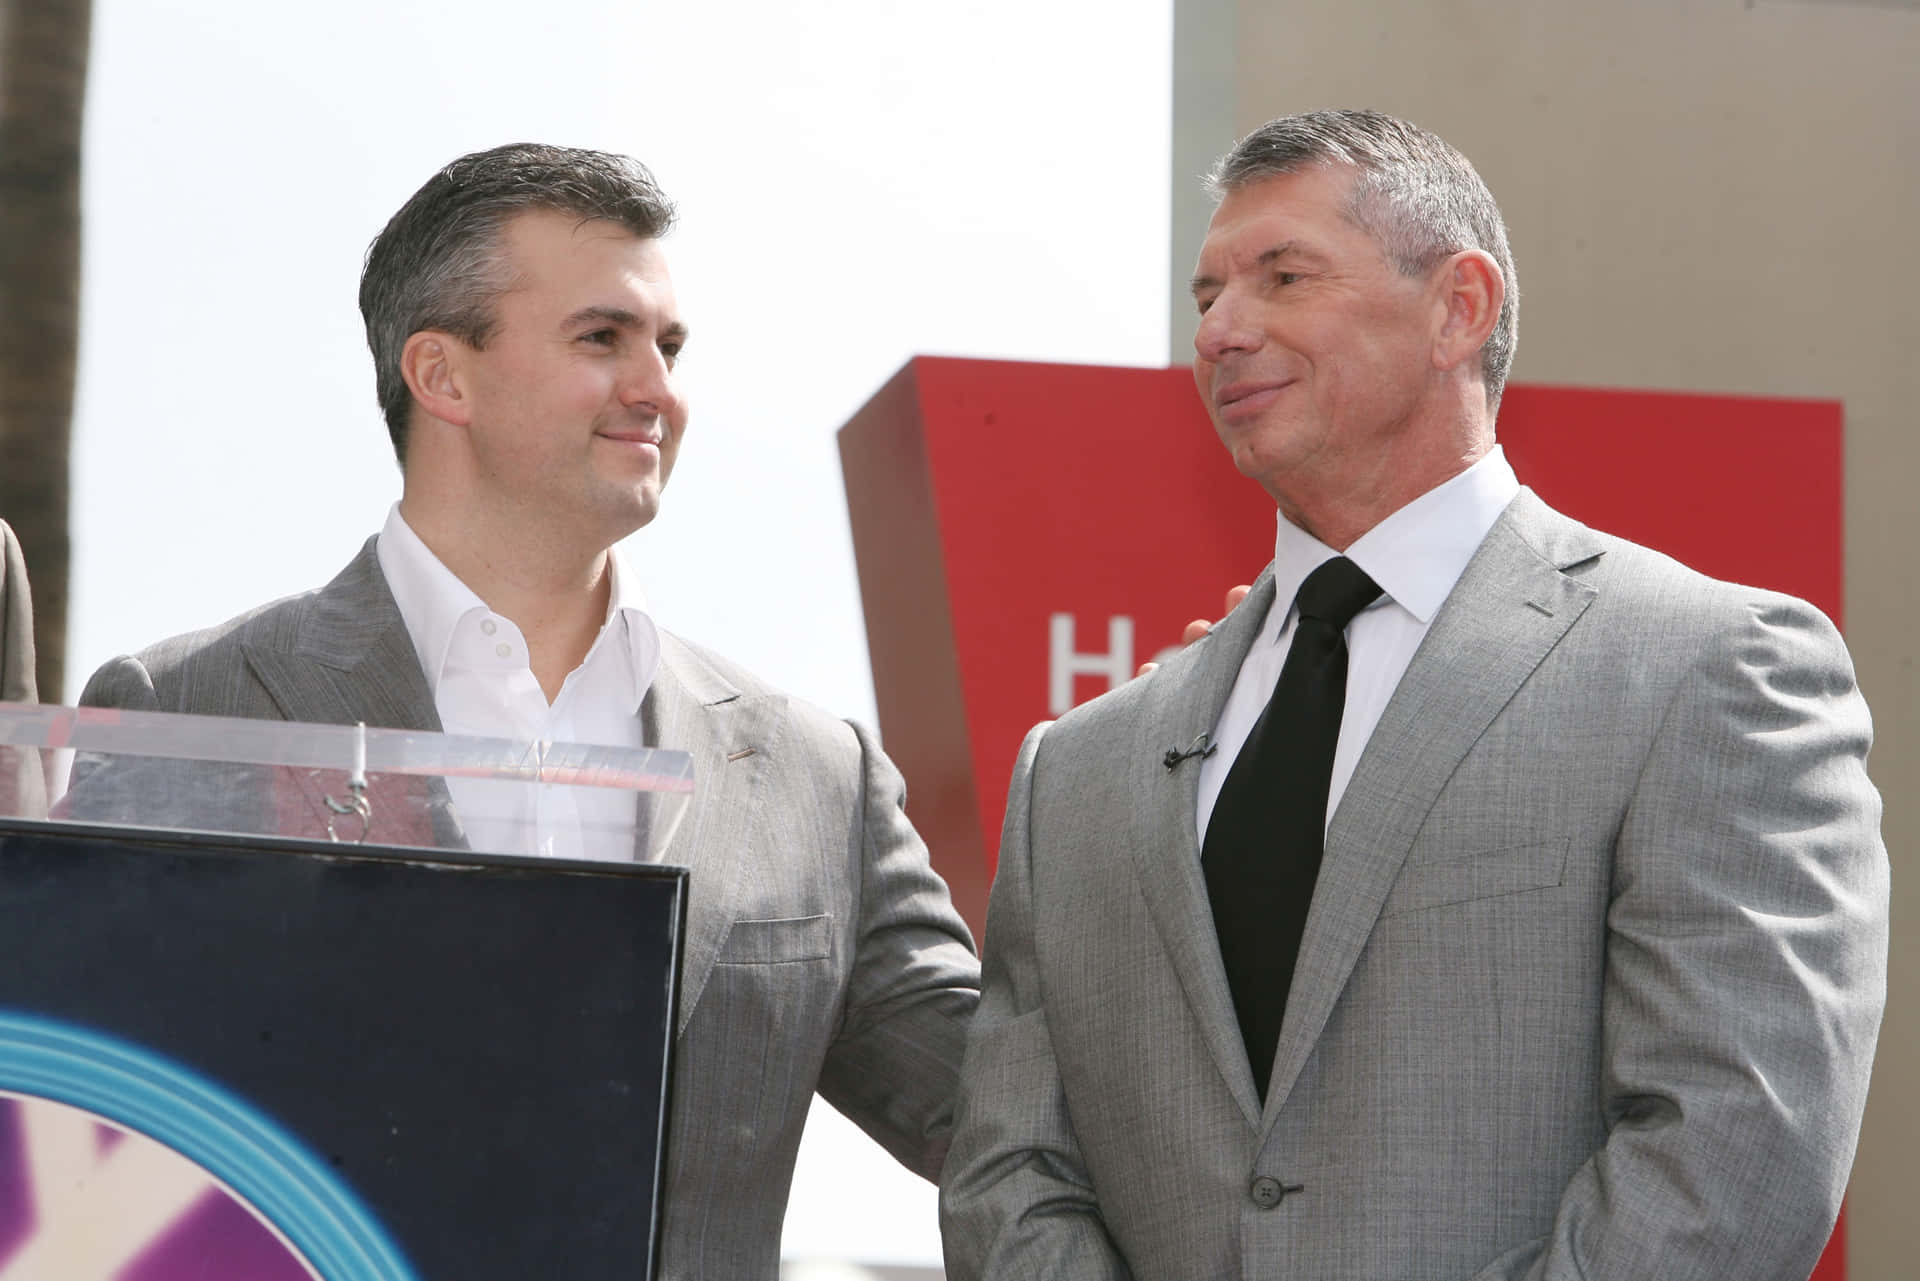 Shane Mcmahon With Vince Mcmahon Background